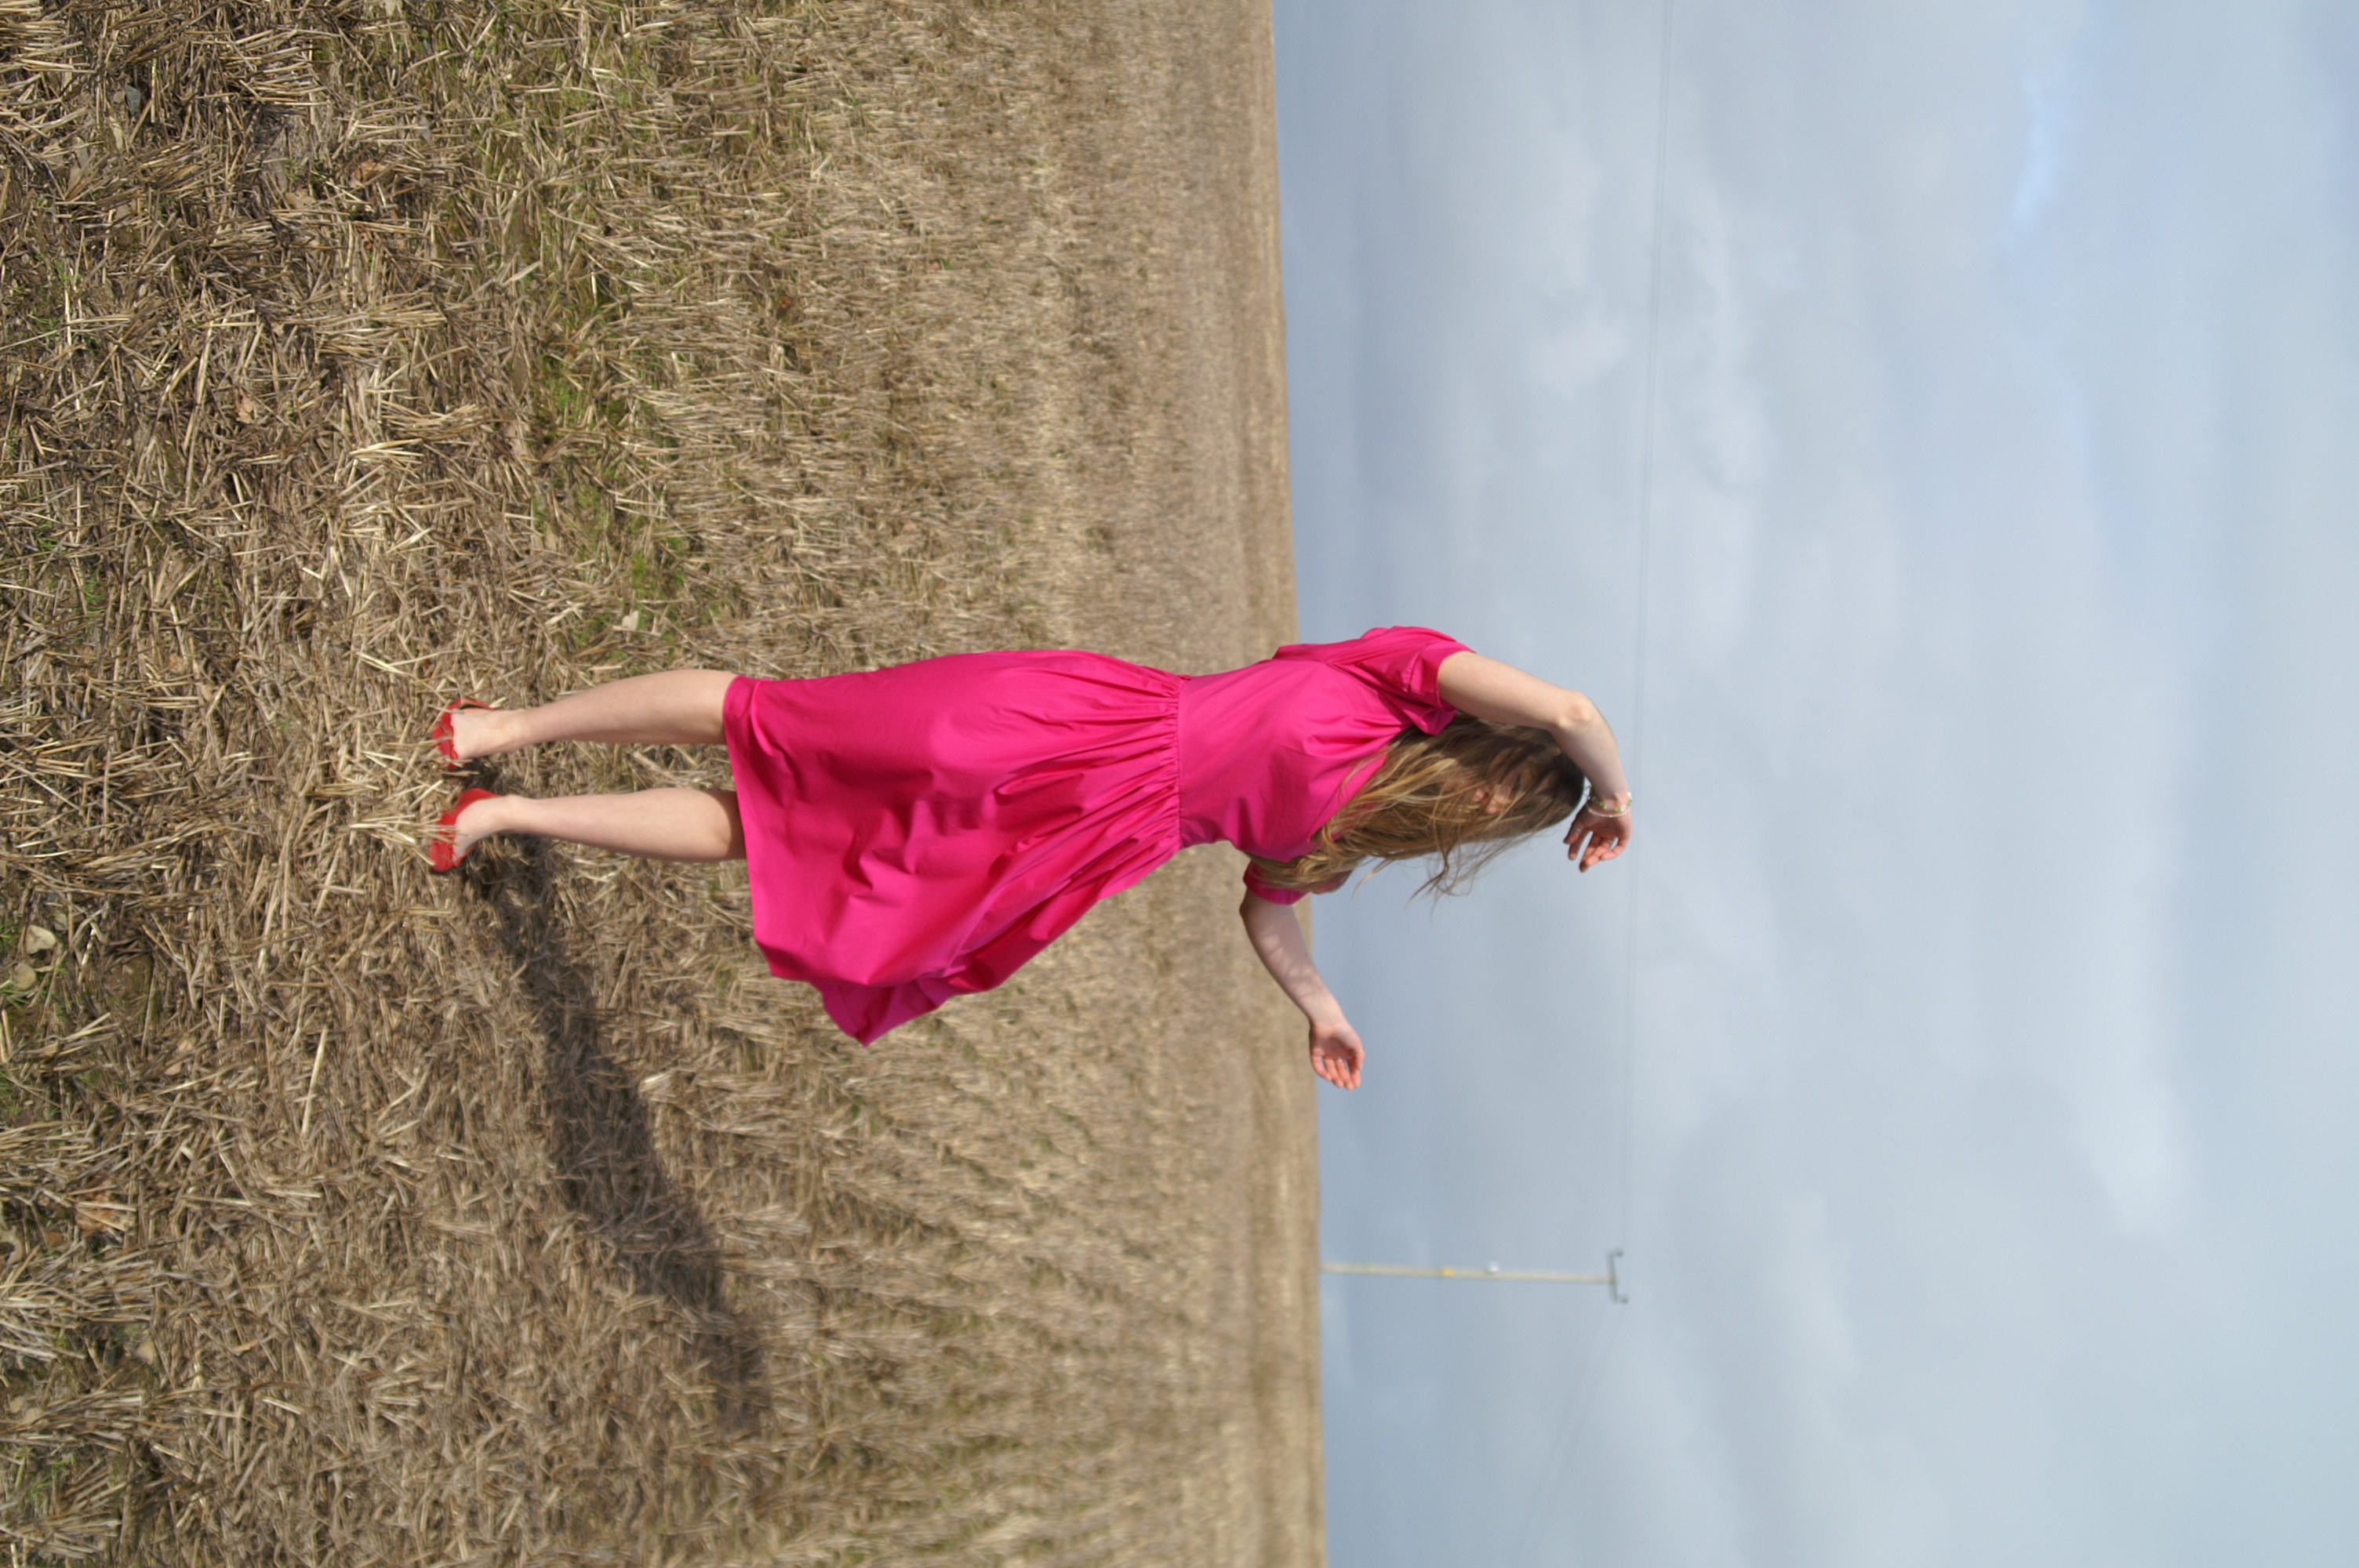 Rachael in the pink Dreamers Dress